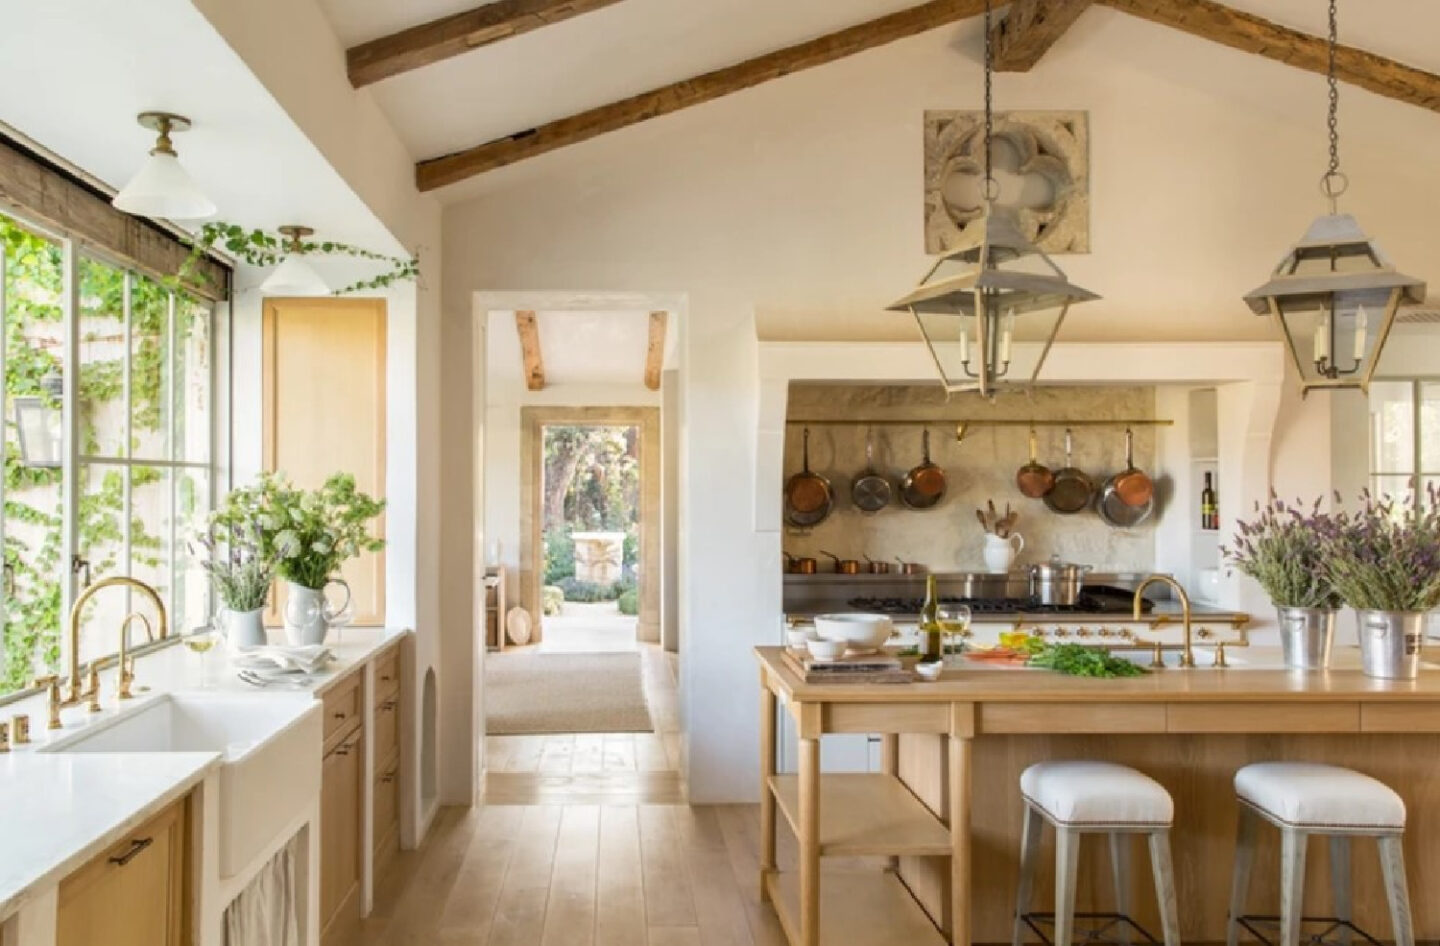 Patina Farm in Ojai, CA - architect: Steve Giannetti and design by Brooke Giannetti. Understated elegance and European country inspired. Photo: Montecito Properties.